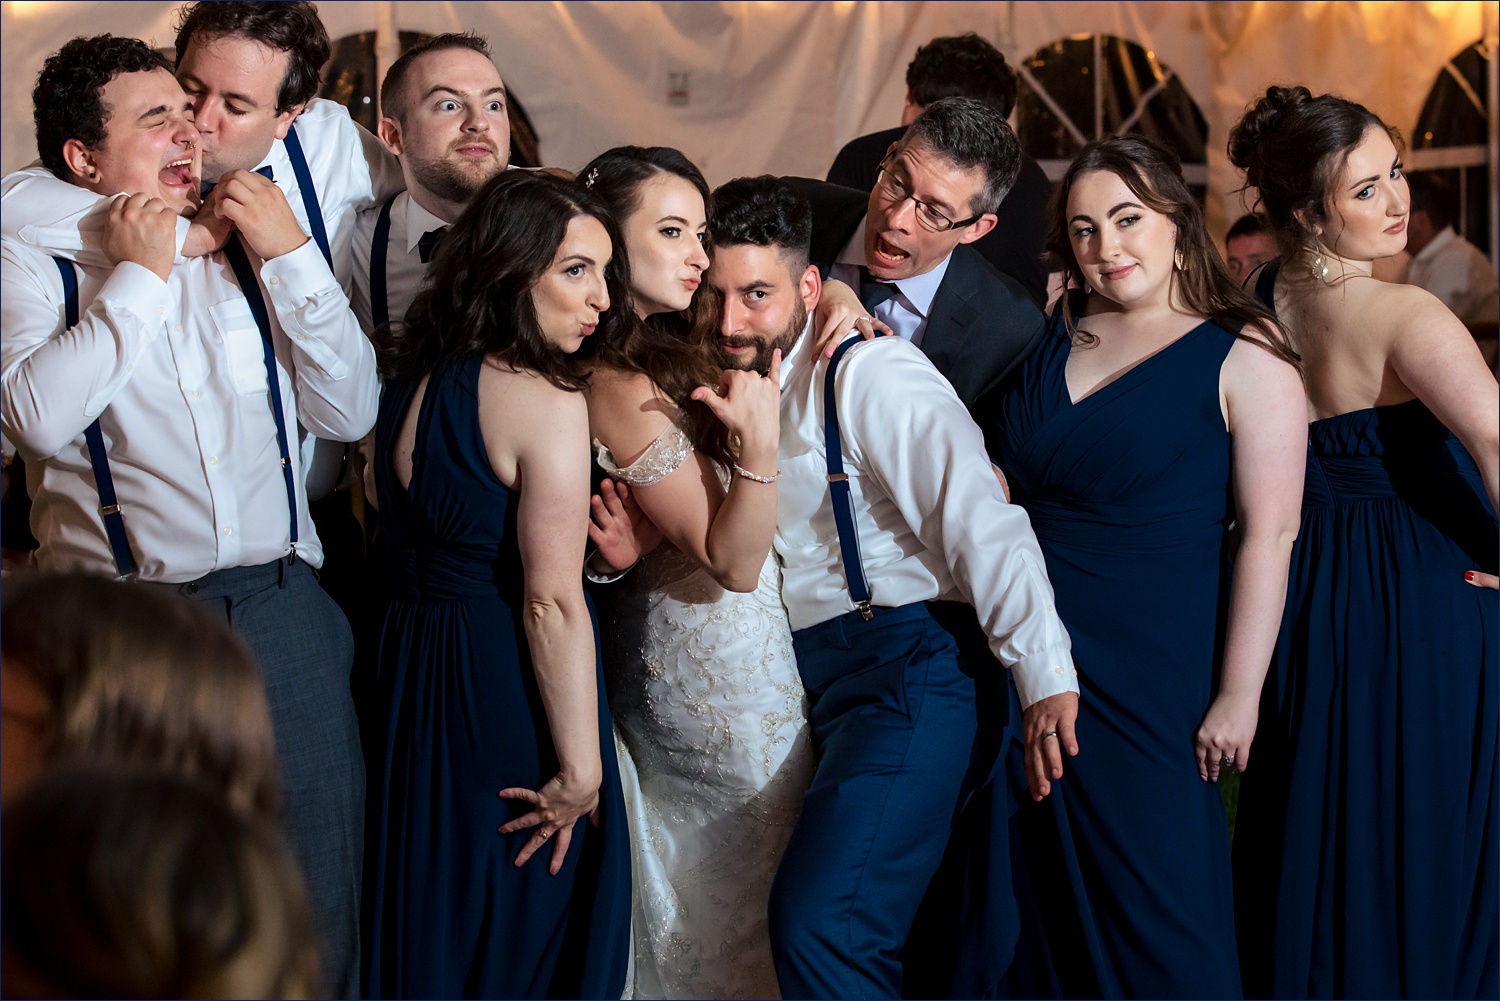 The bride and groom surround themselves with their best friends at the New Hampshire wedding reception